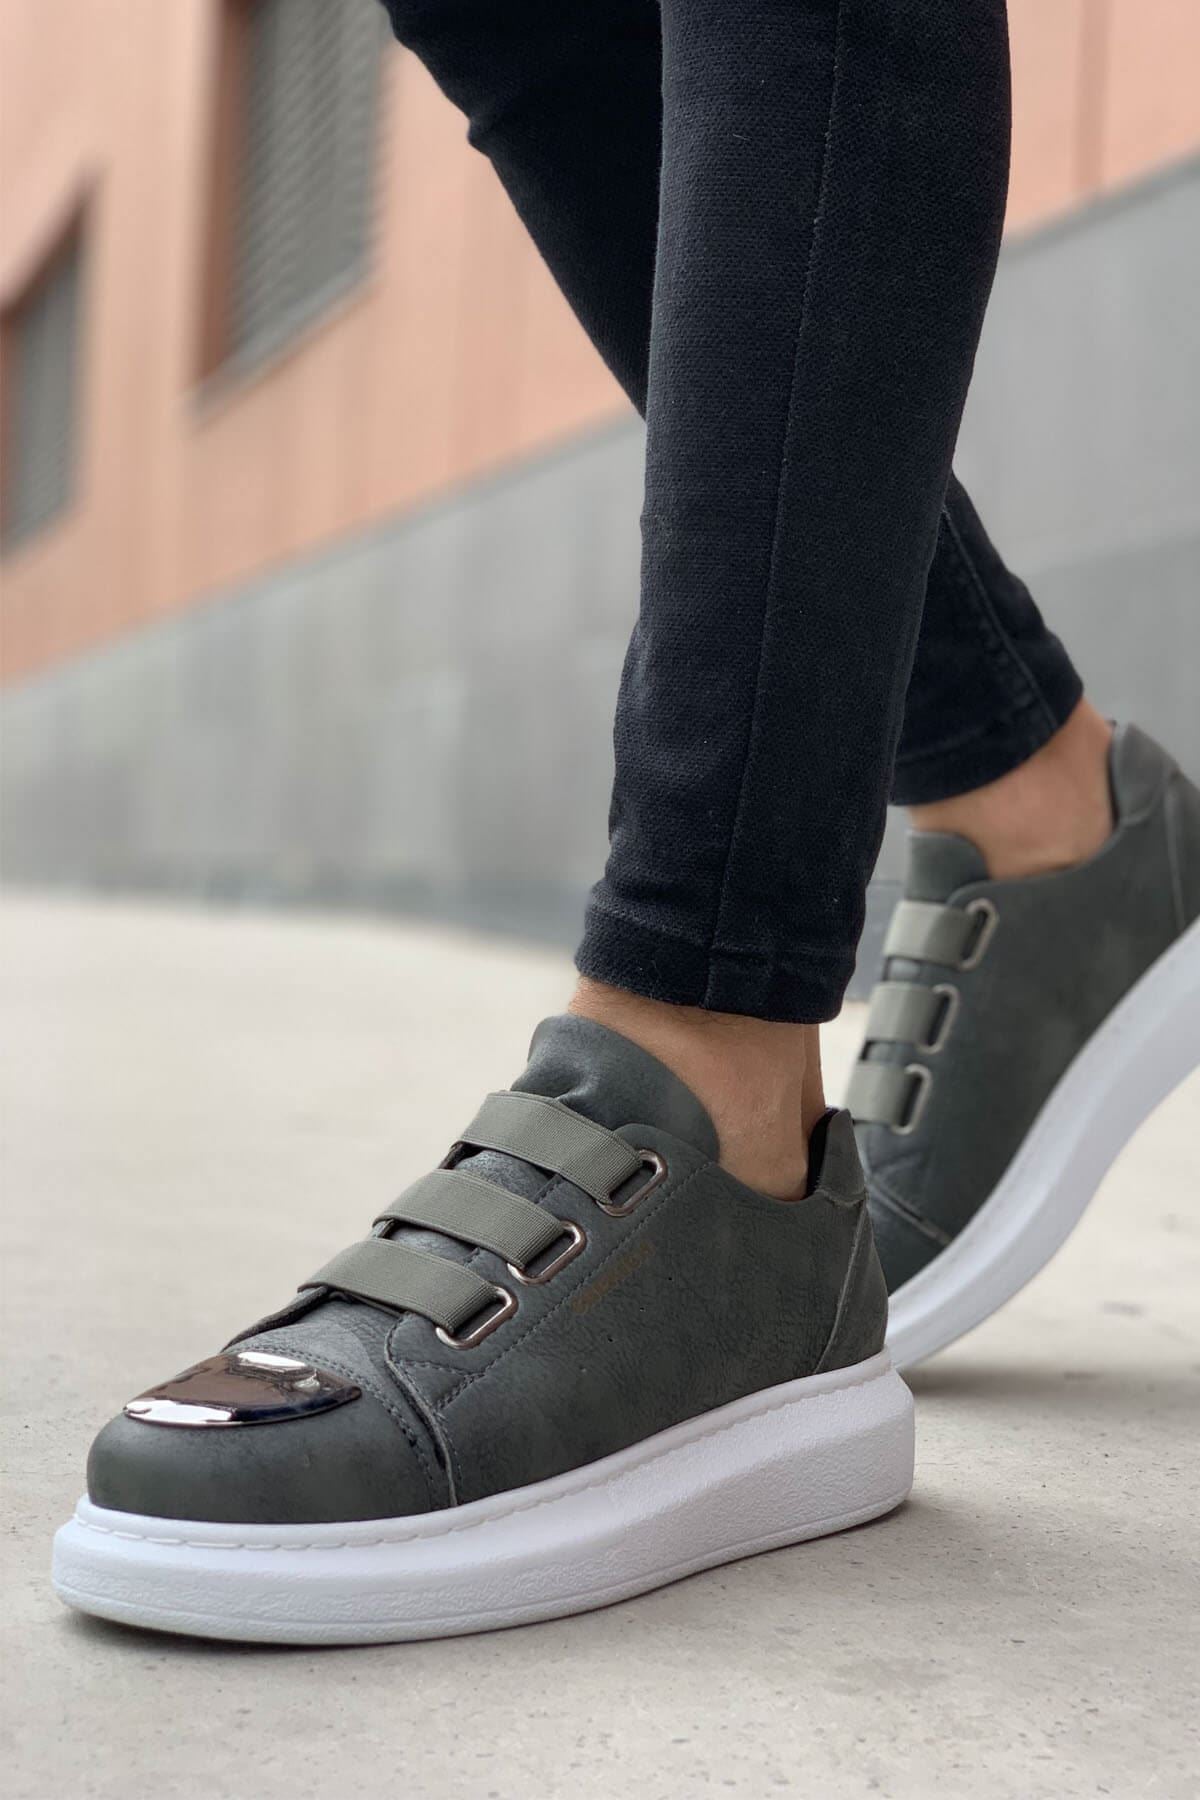 Original Design CH251 Unisex Grey-New Trend Shiny Accessory Casual Sneaker Sports Shoes - STREETMODE ™